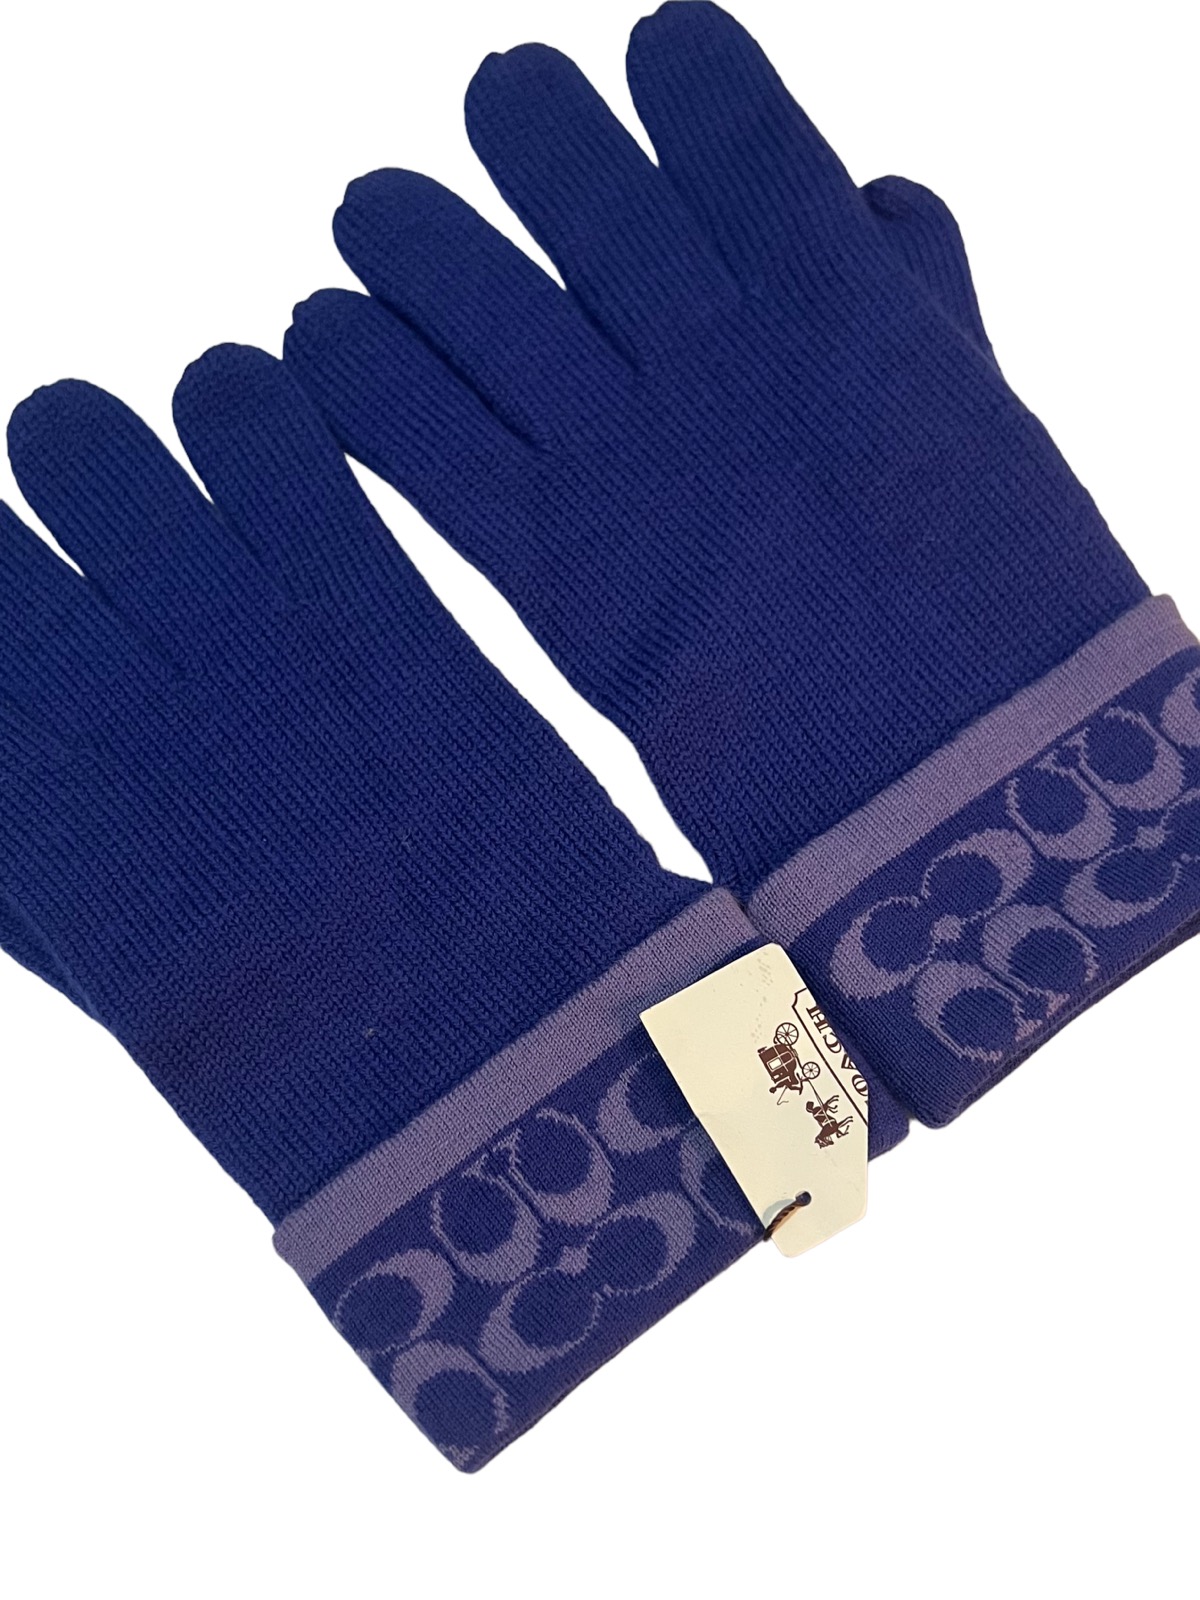 Coach - COACH ( NEW OLD STOCK ) (NOS) SIGNATURE KNIT TECH GLOVES - 5